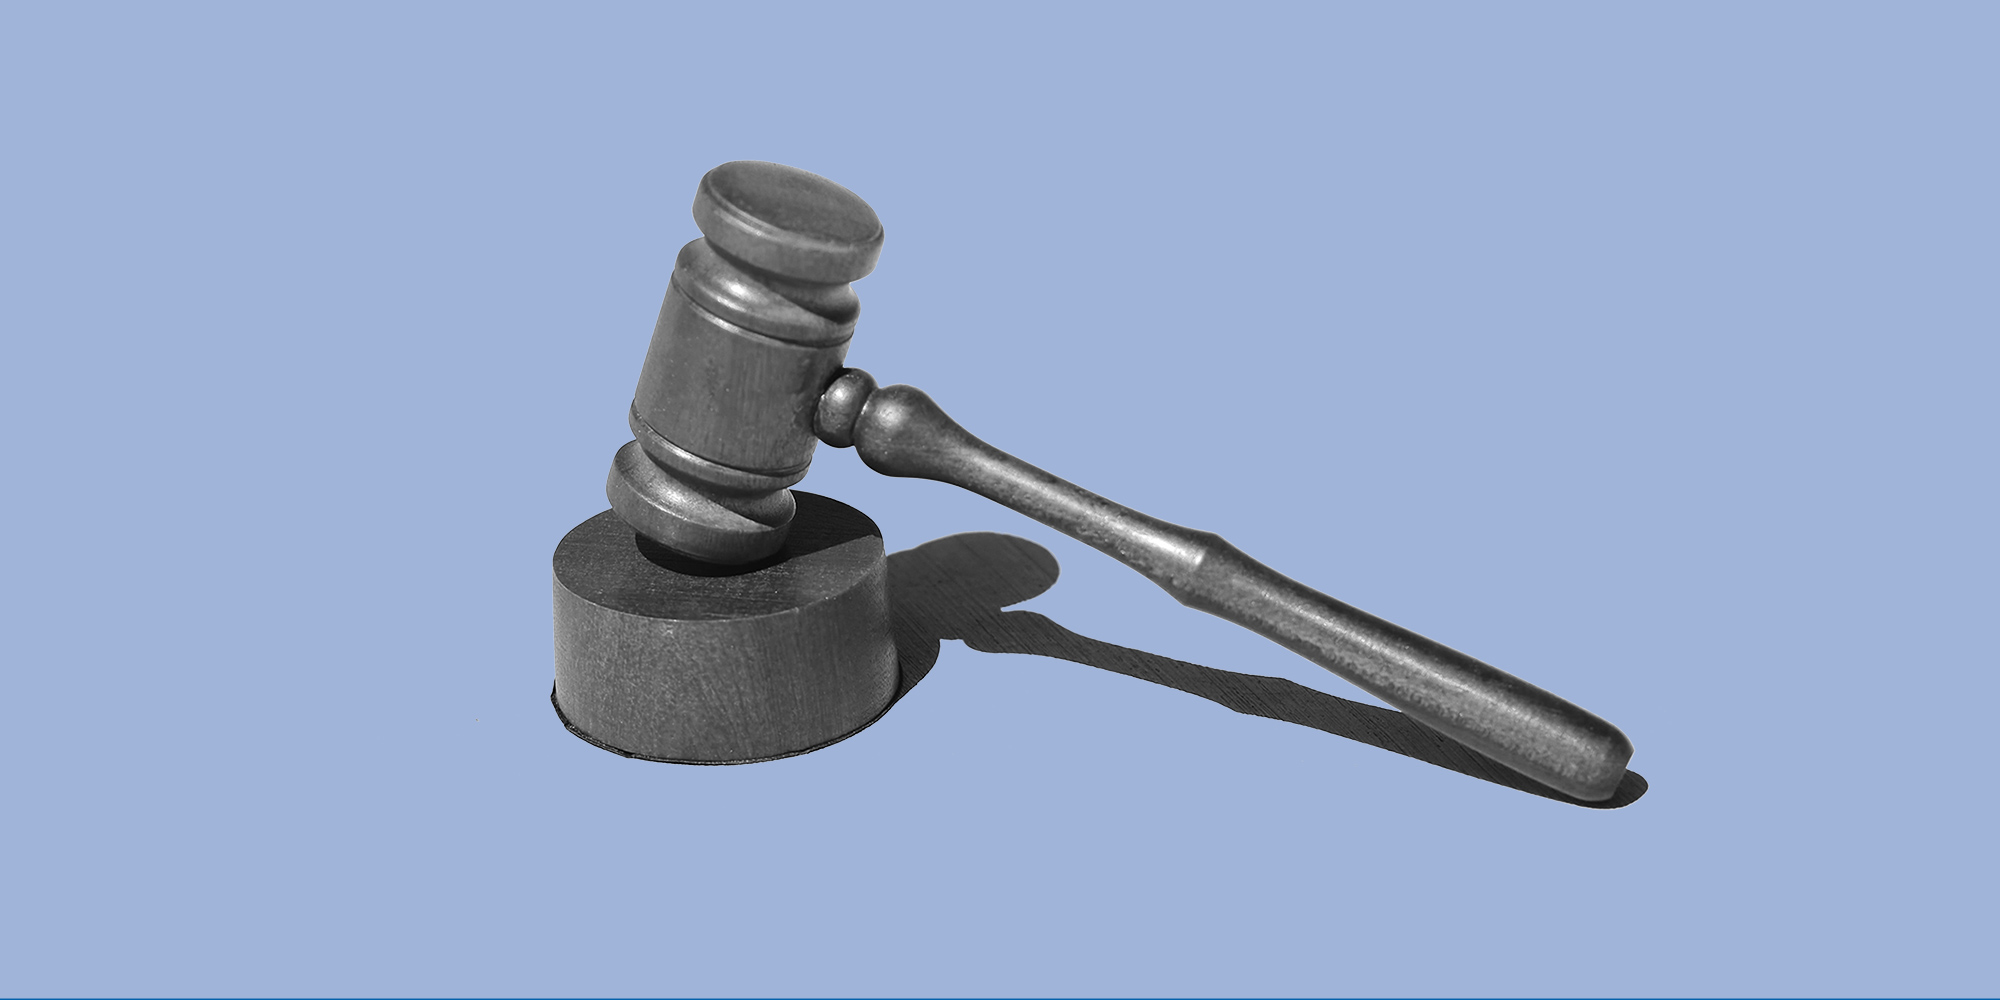 Gavel on a blue background. What's the deal with opiate laws in New Jersey?